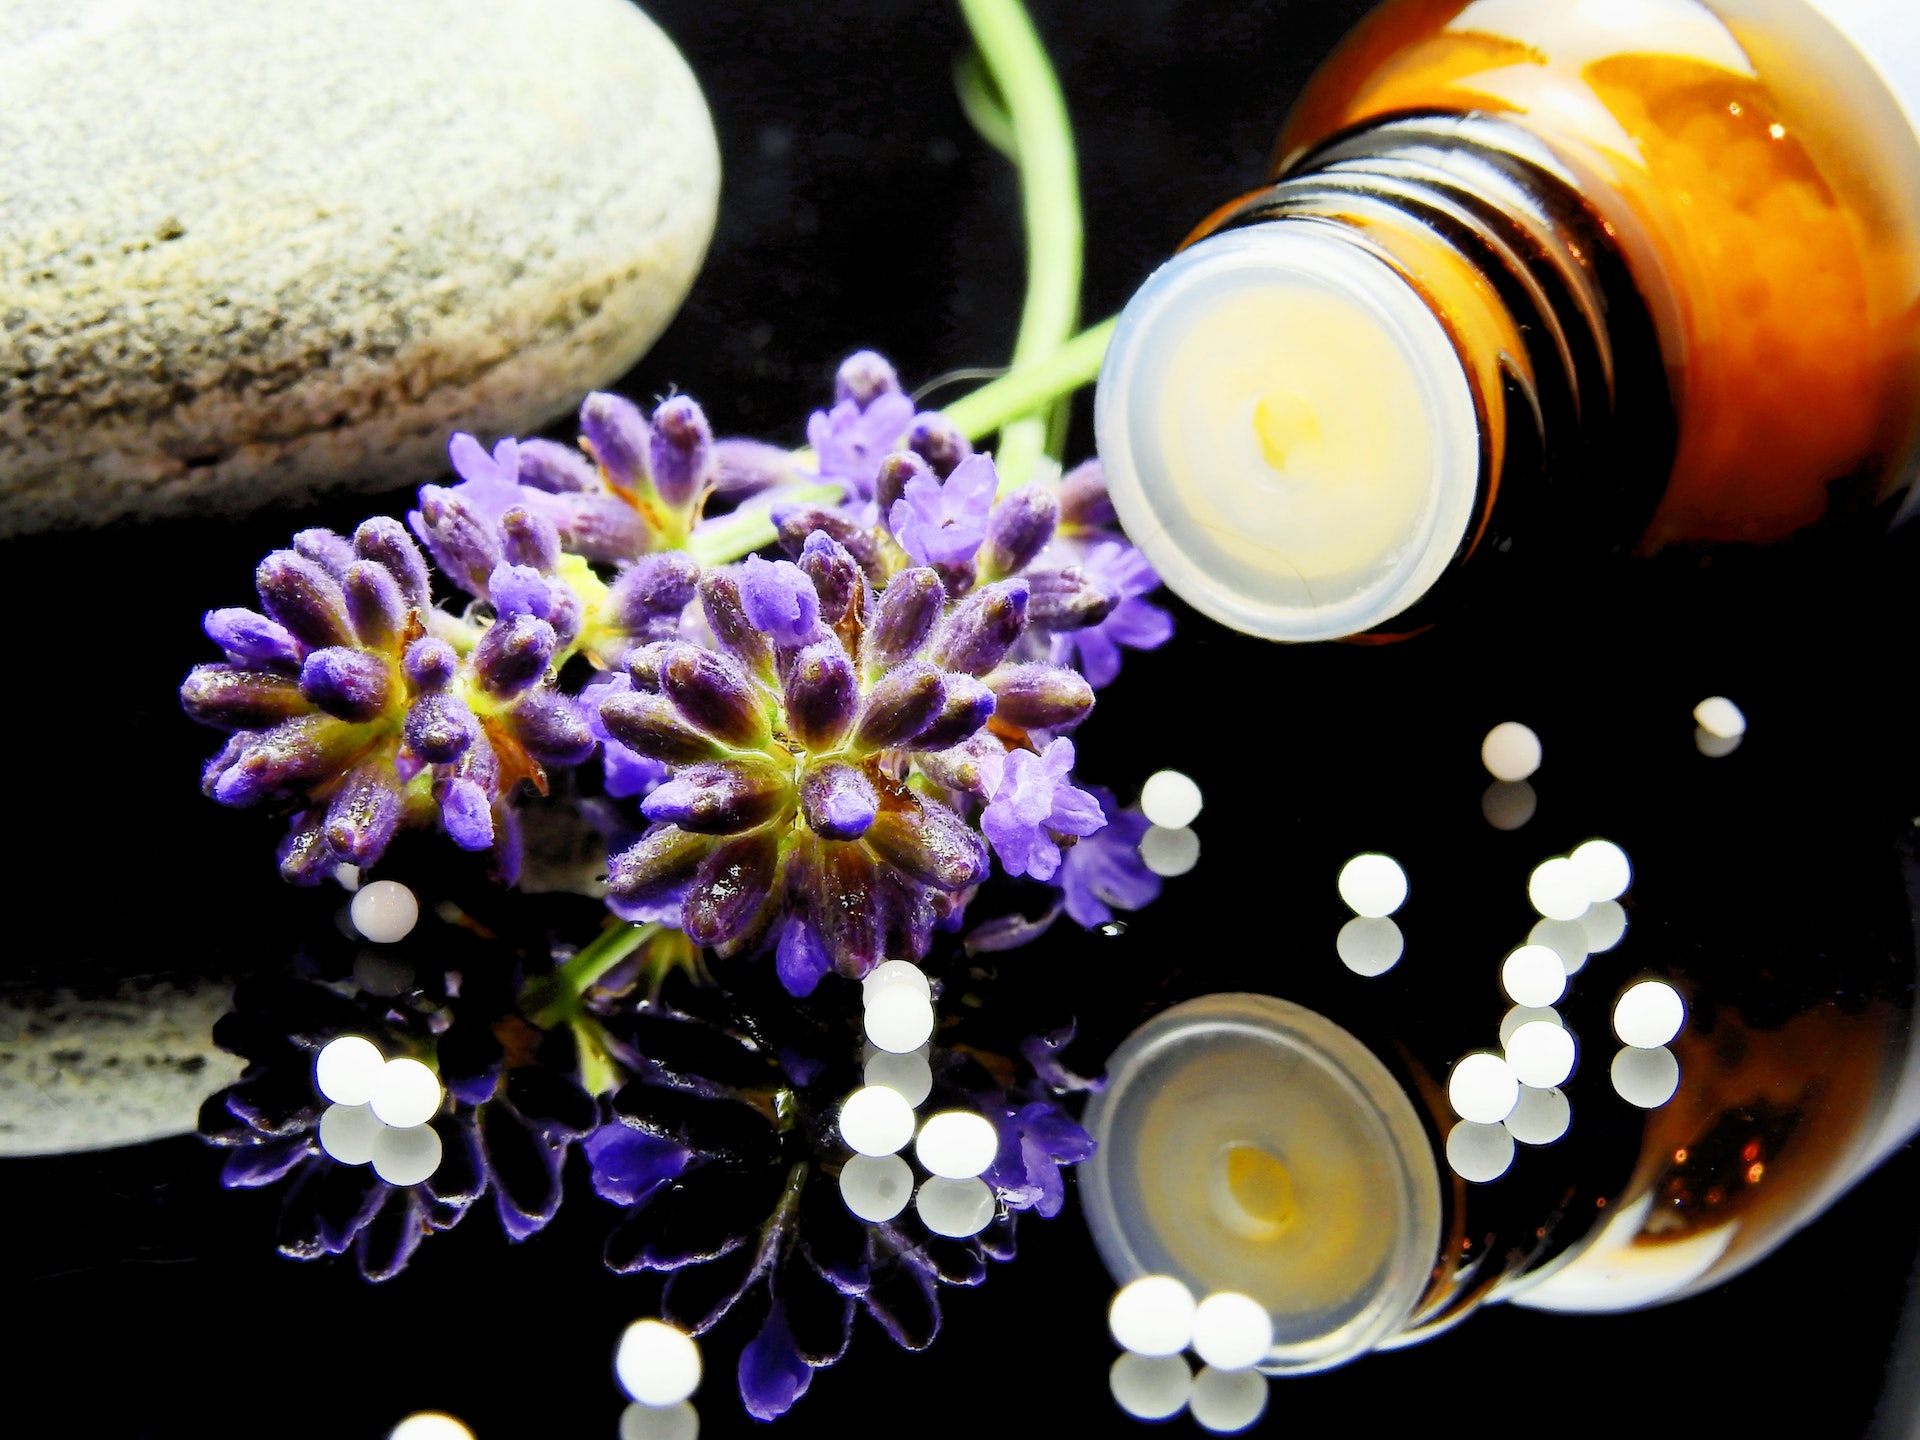 does homeopathy work for ckd patients